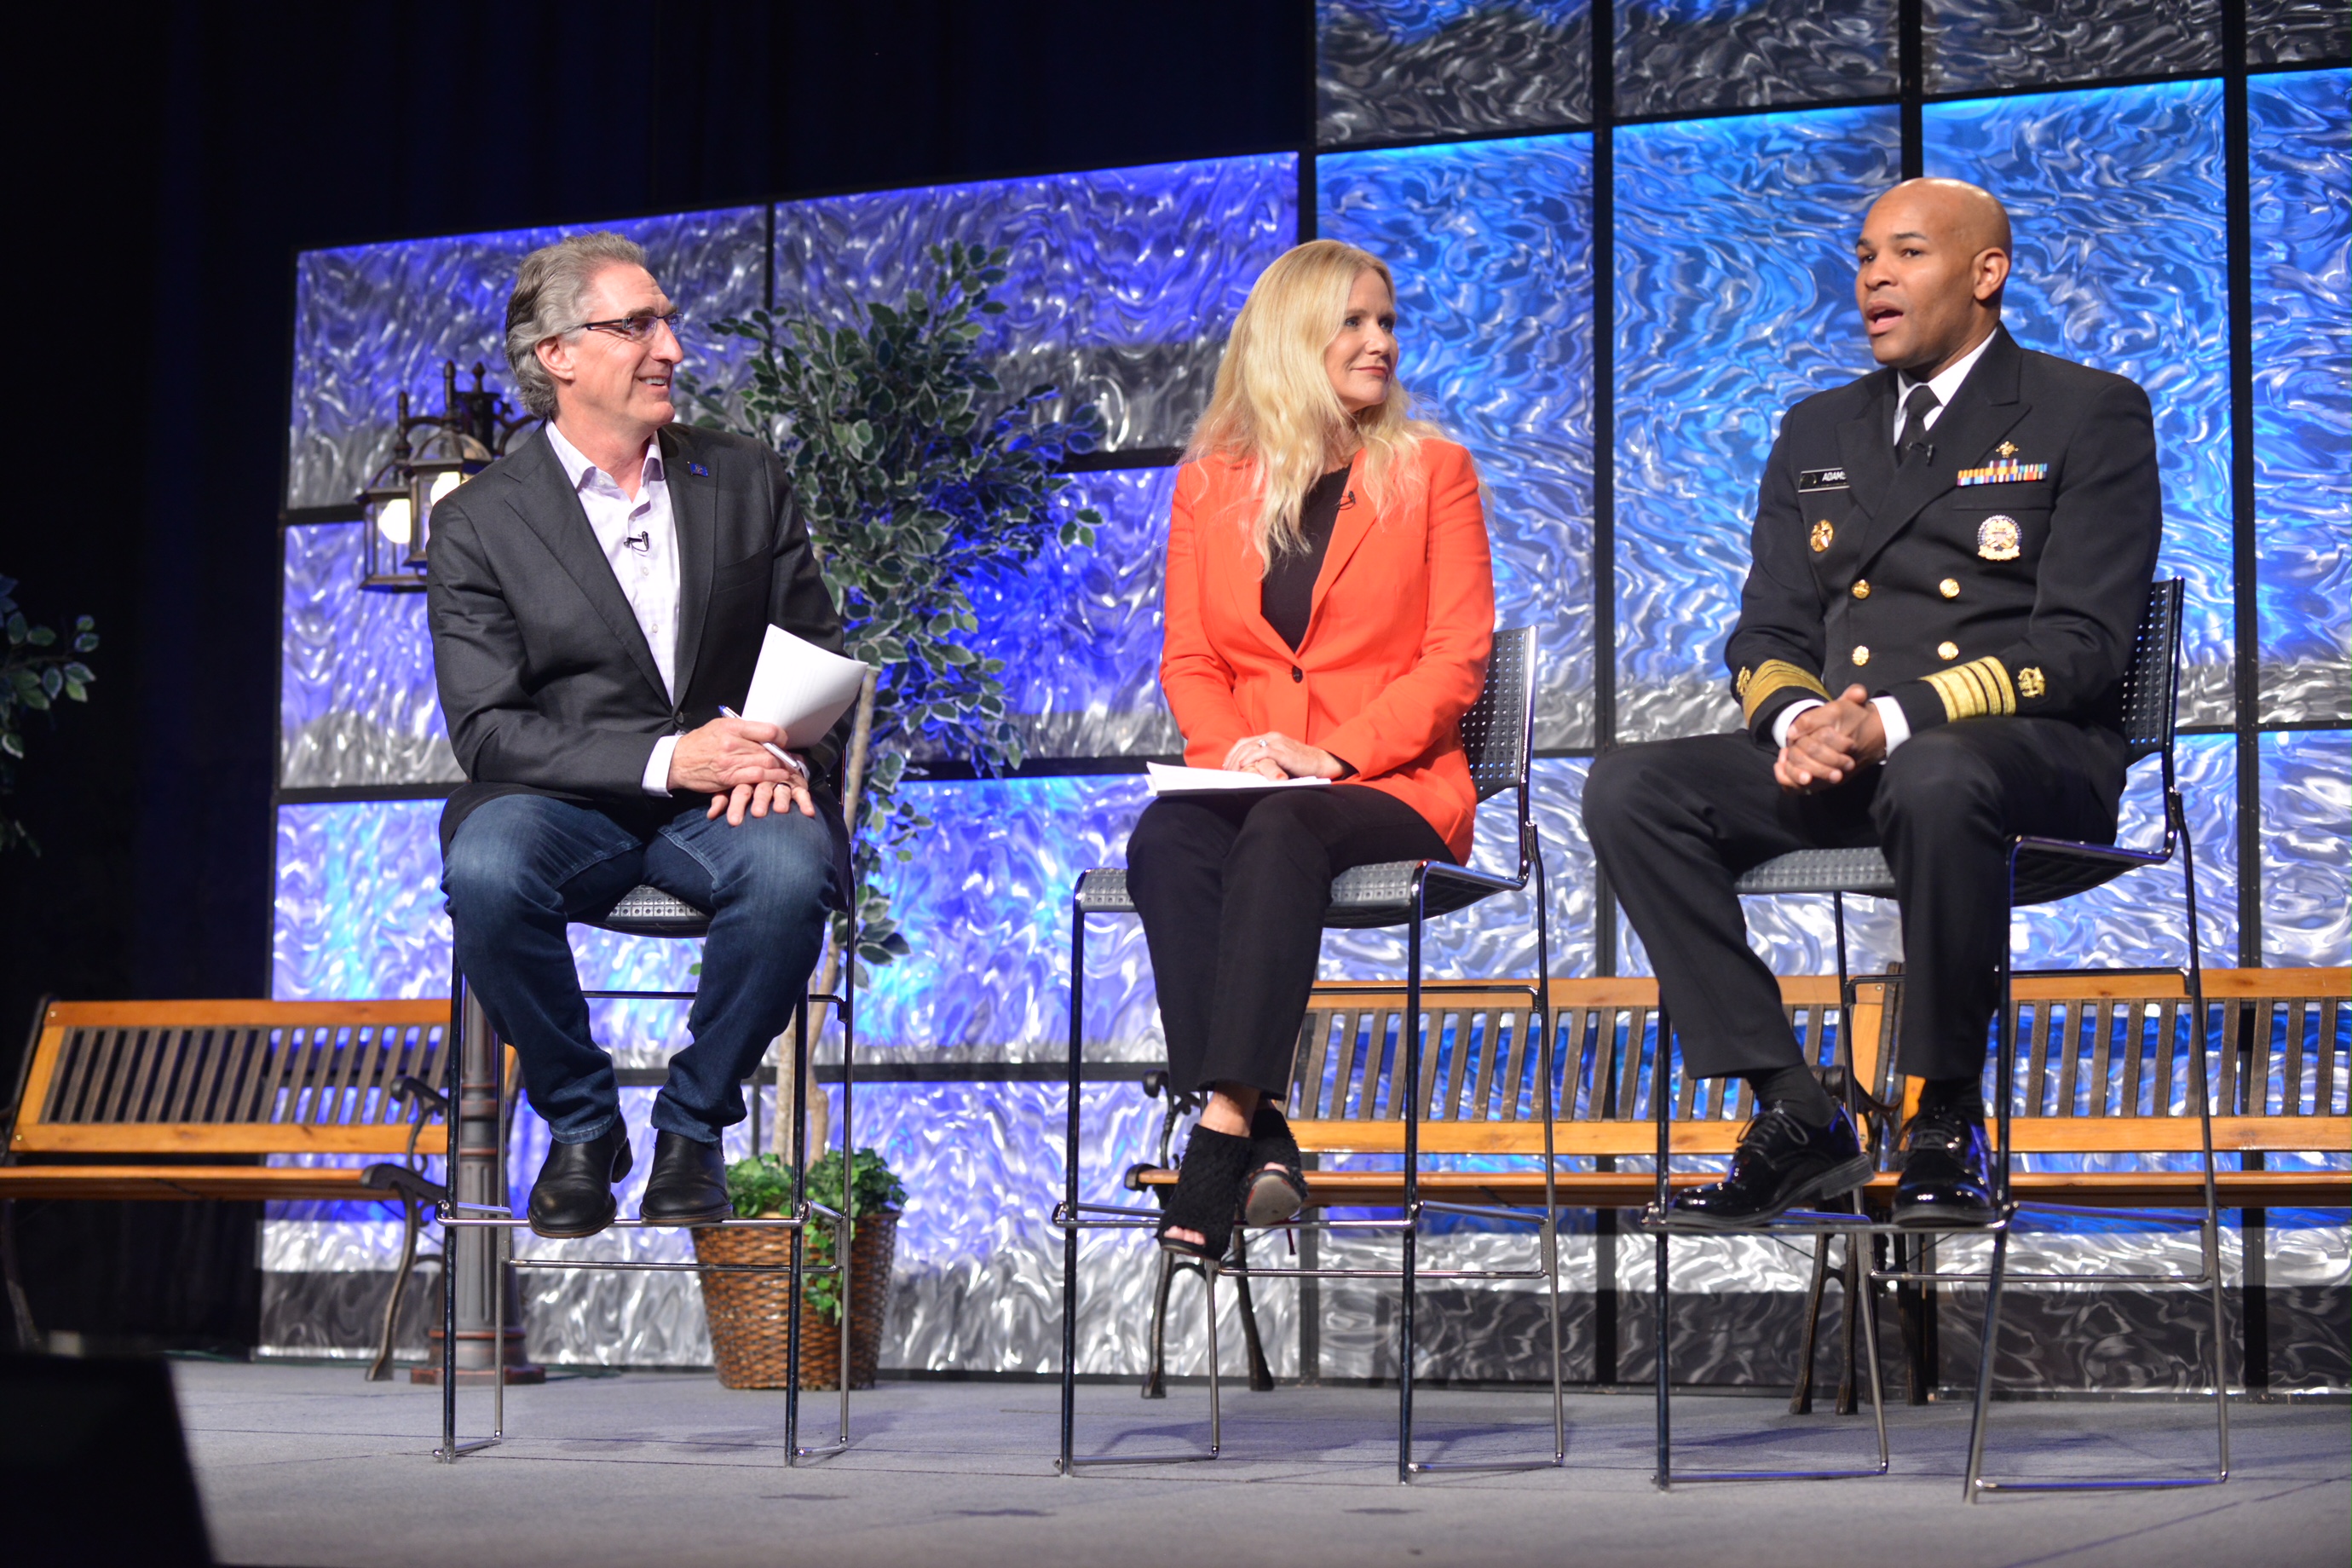 Governor Doug Burgum and First Lady Kathryn Burgum with U.S. Surgeon General Vice Admiral Jerome Adams